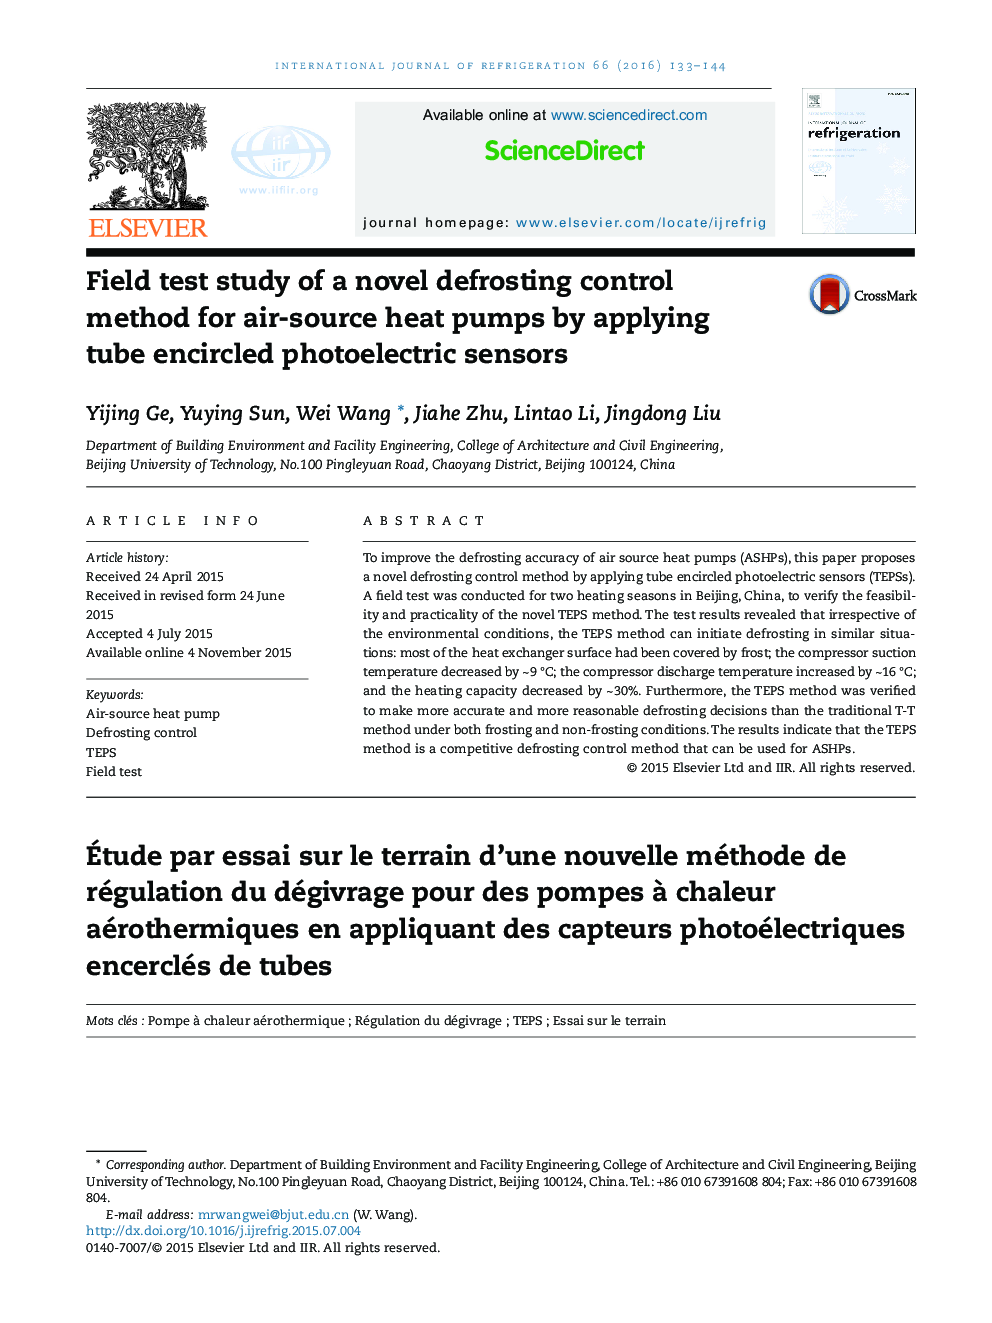 Field test study of a novel defrosting control method for air-source heat pumps by applying tube encircled photoelectric sensors